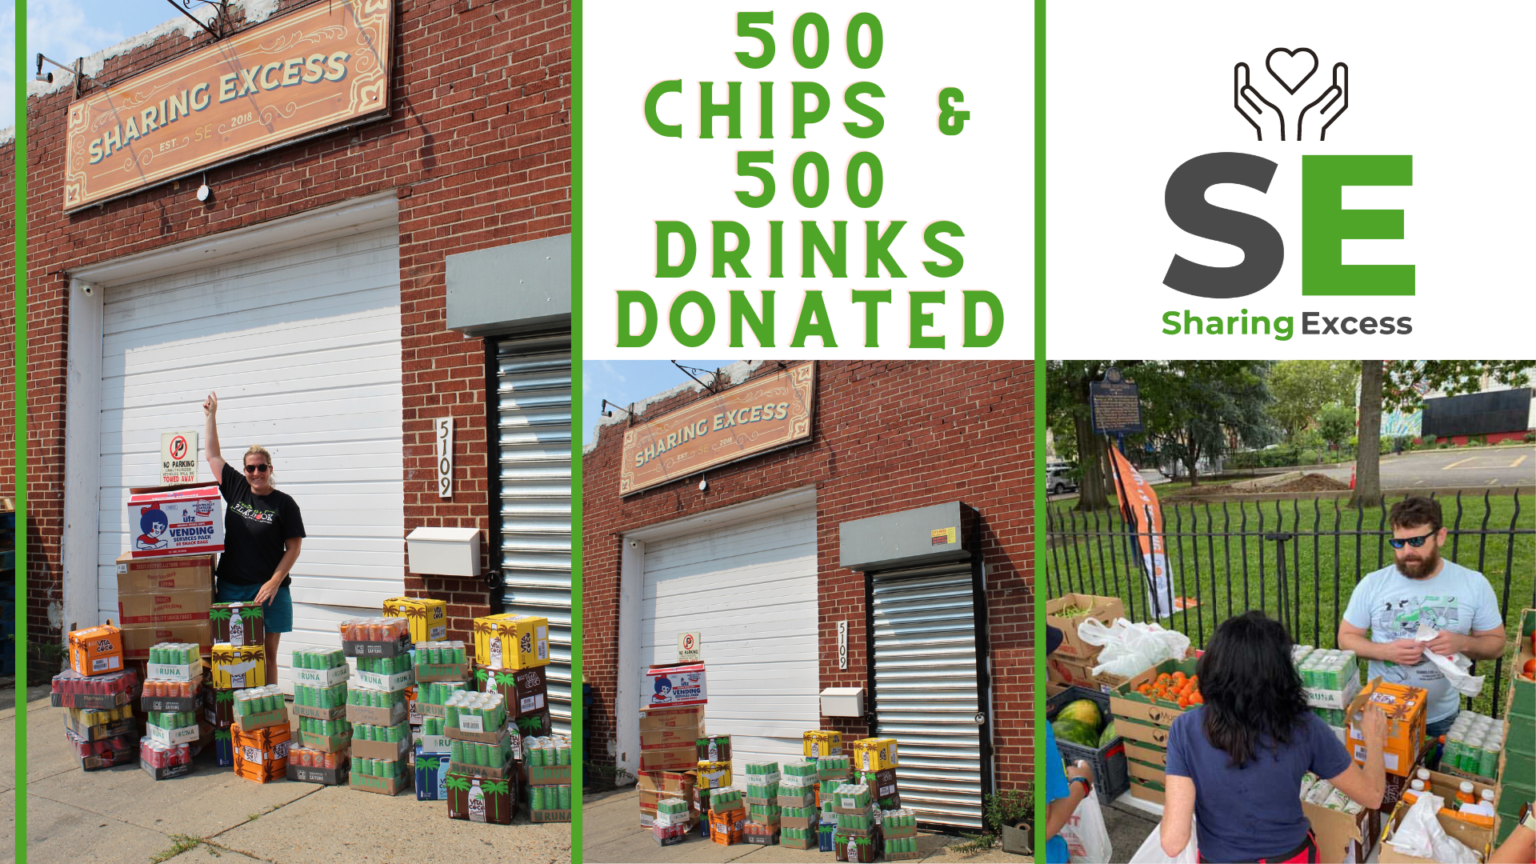 Jaws Youth Playbook Donates 500 Snacks & Drinks to Sharing Excess